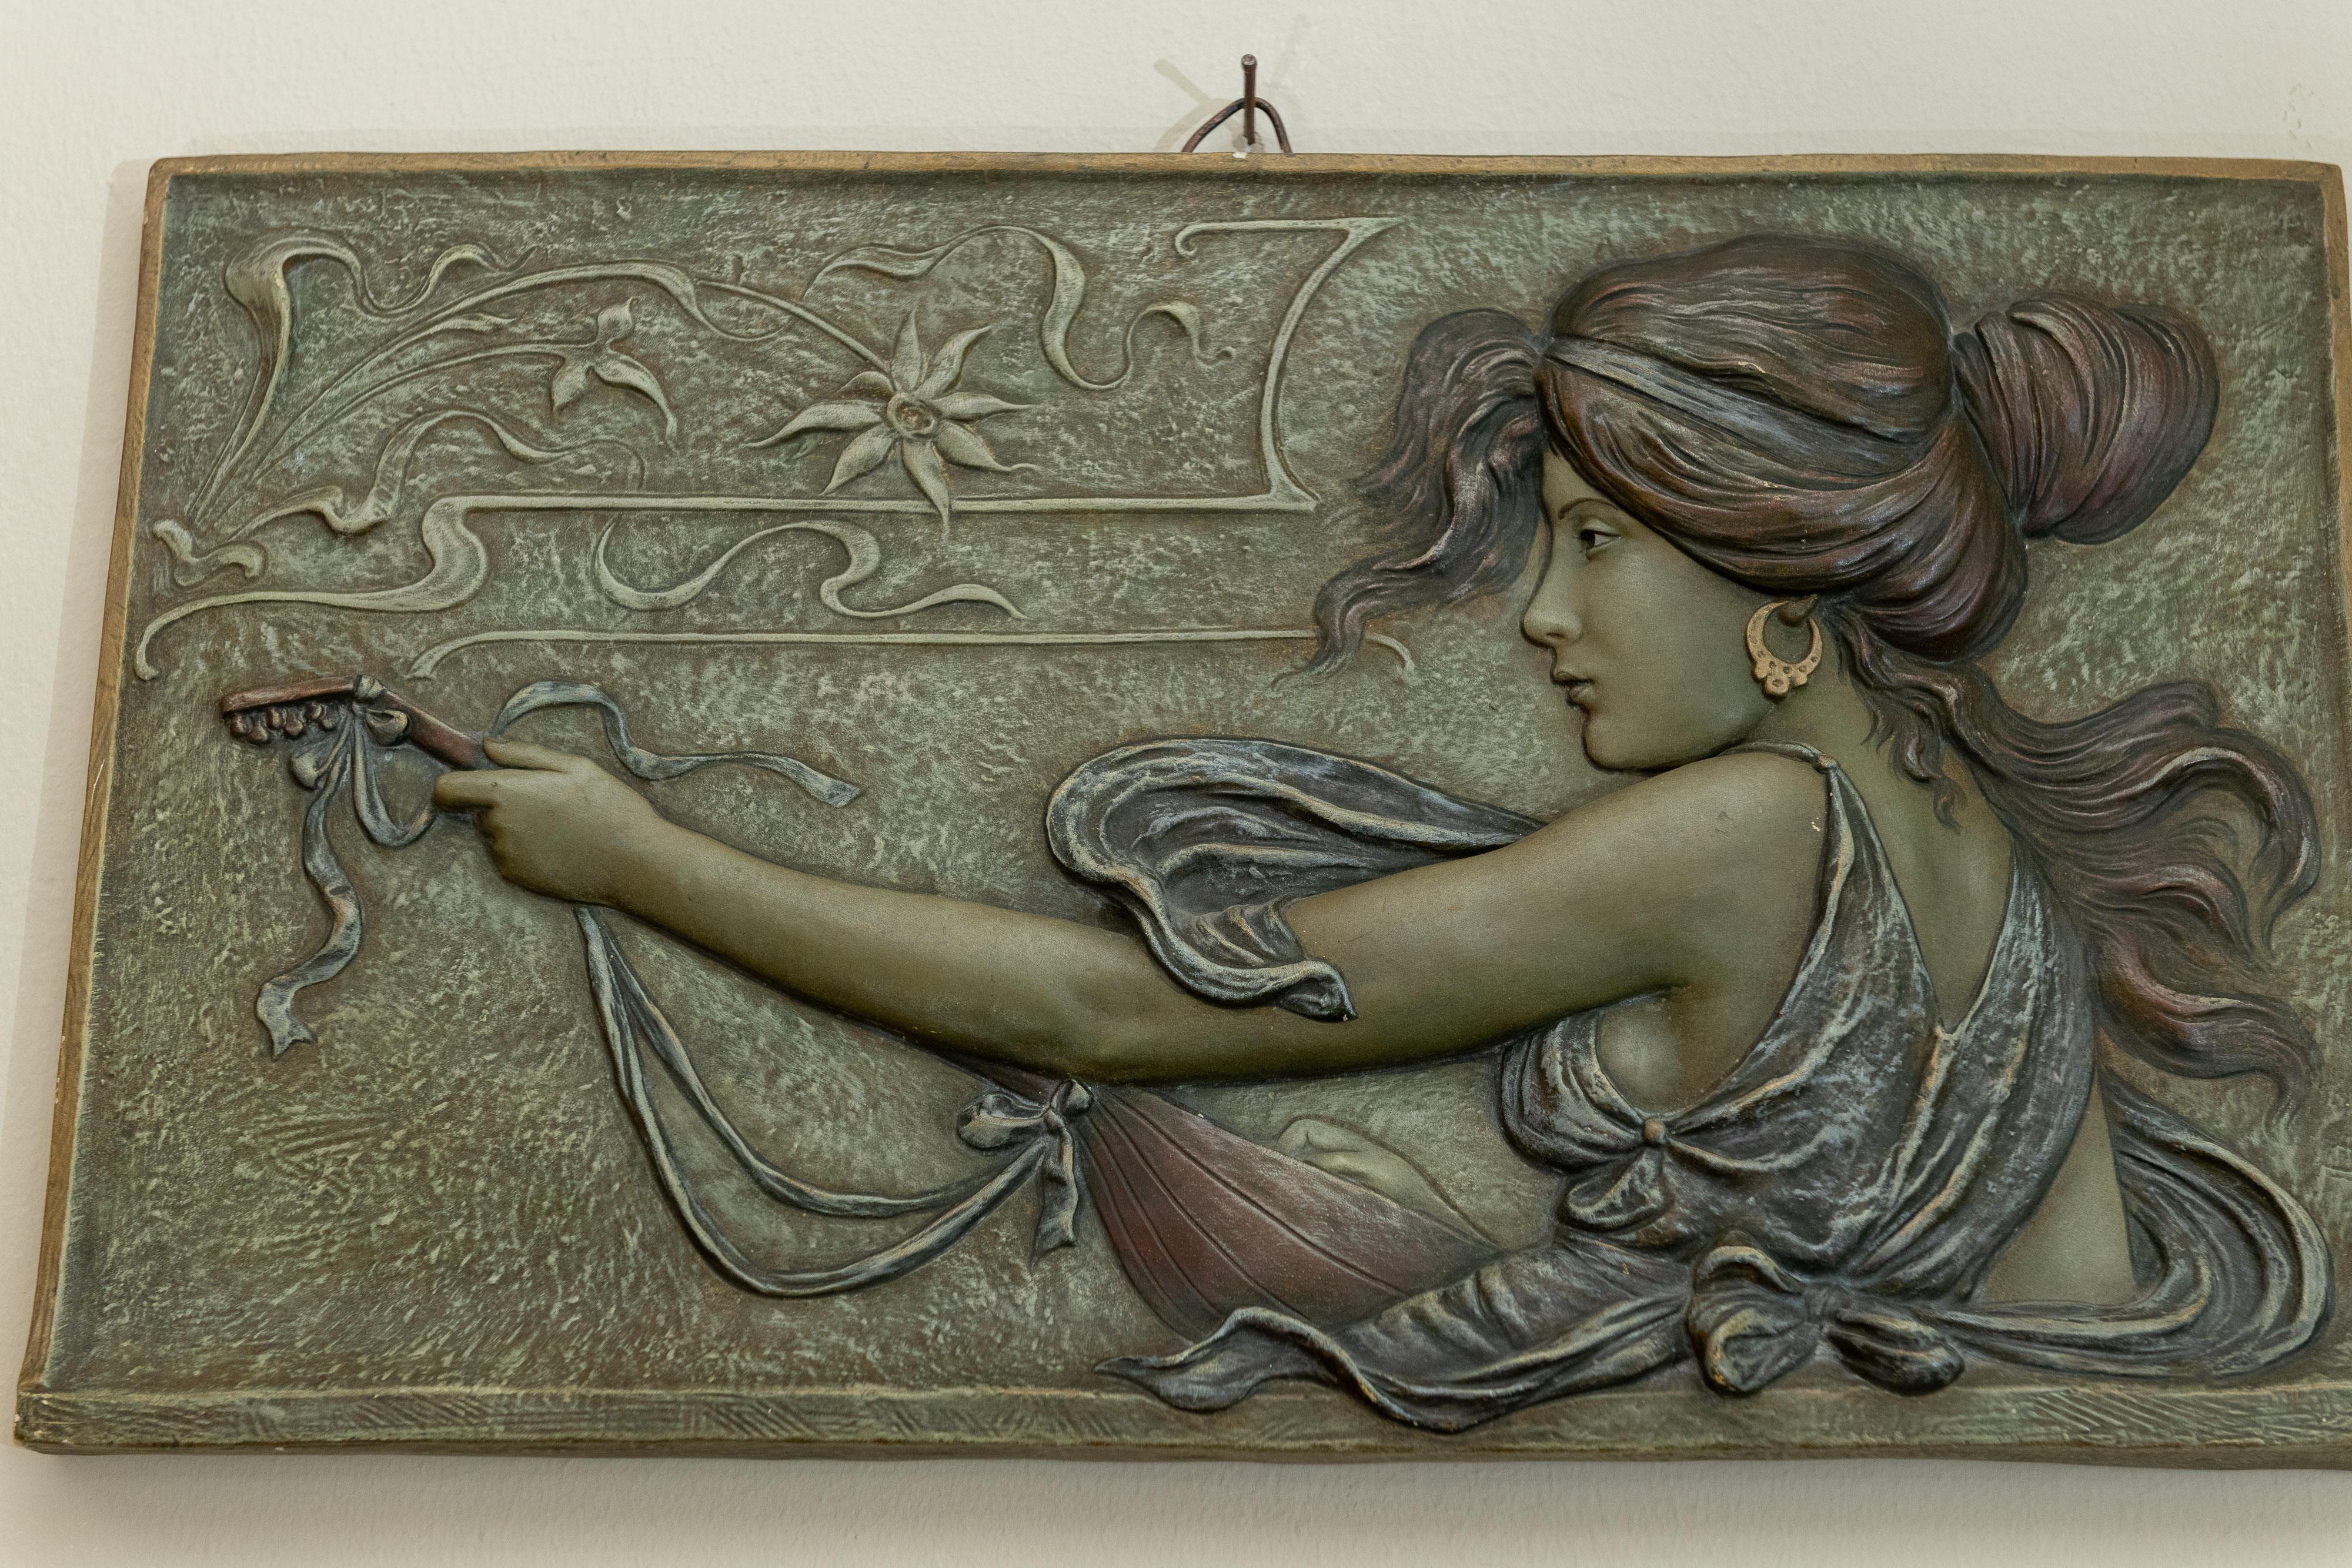 Hand-Crafted Pair of Austrian Art Nouveau Terracotta Wall Plaques, Signed, circa 1900